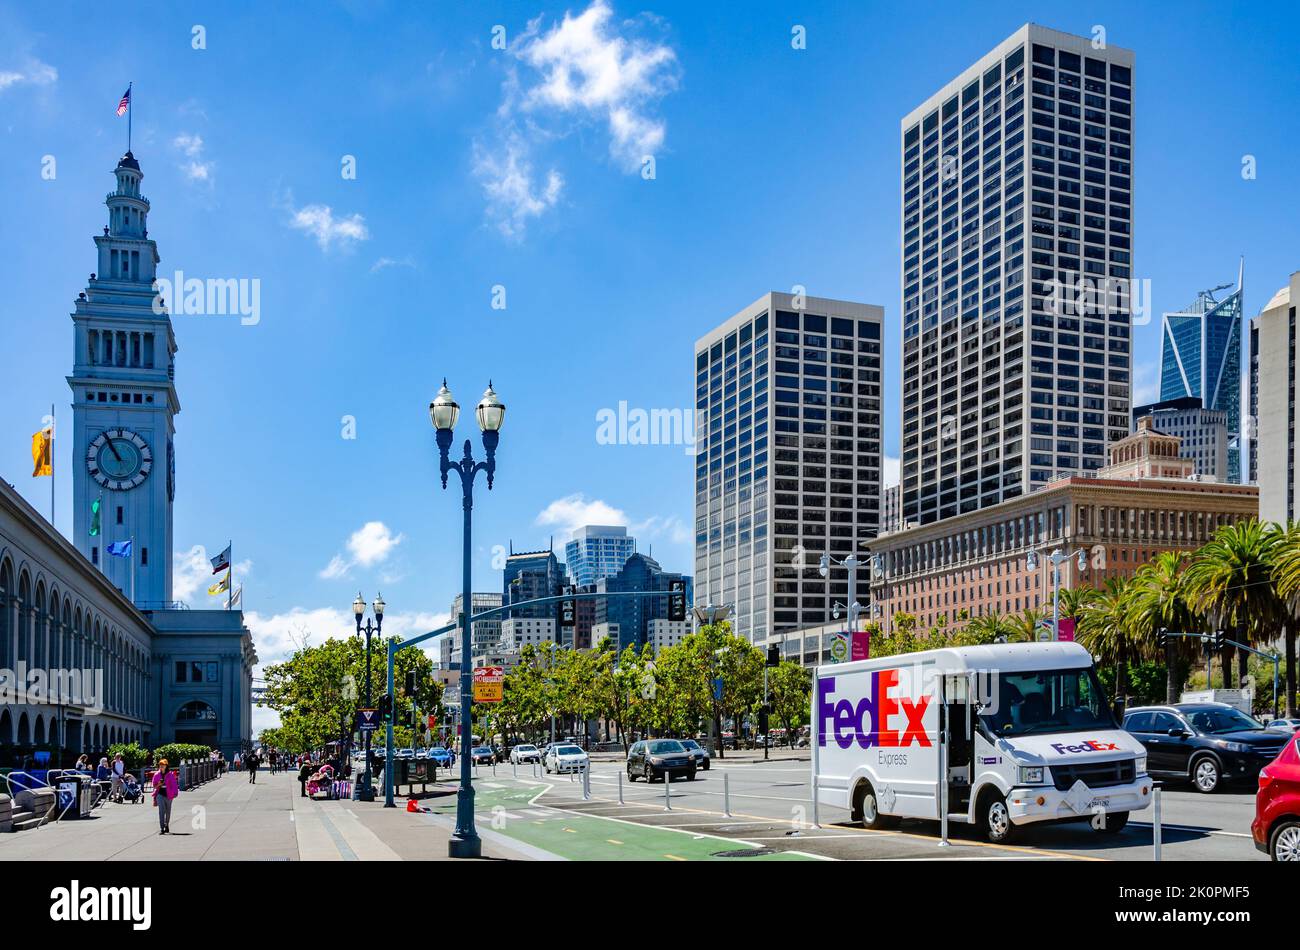 A view of Embarcadero in San Francisco on a dummer's day with blue sky and sunshine with One Market Plaza and The Ferry Port Clock Tower Stock Photo